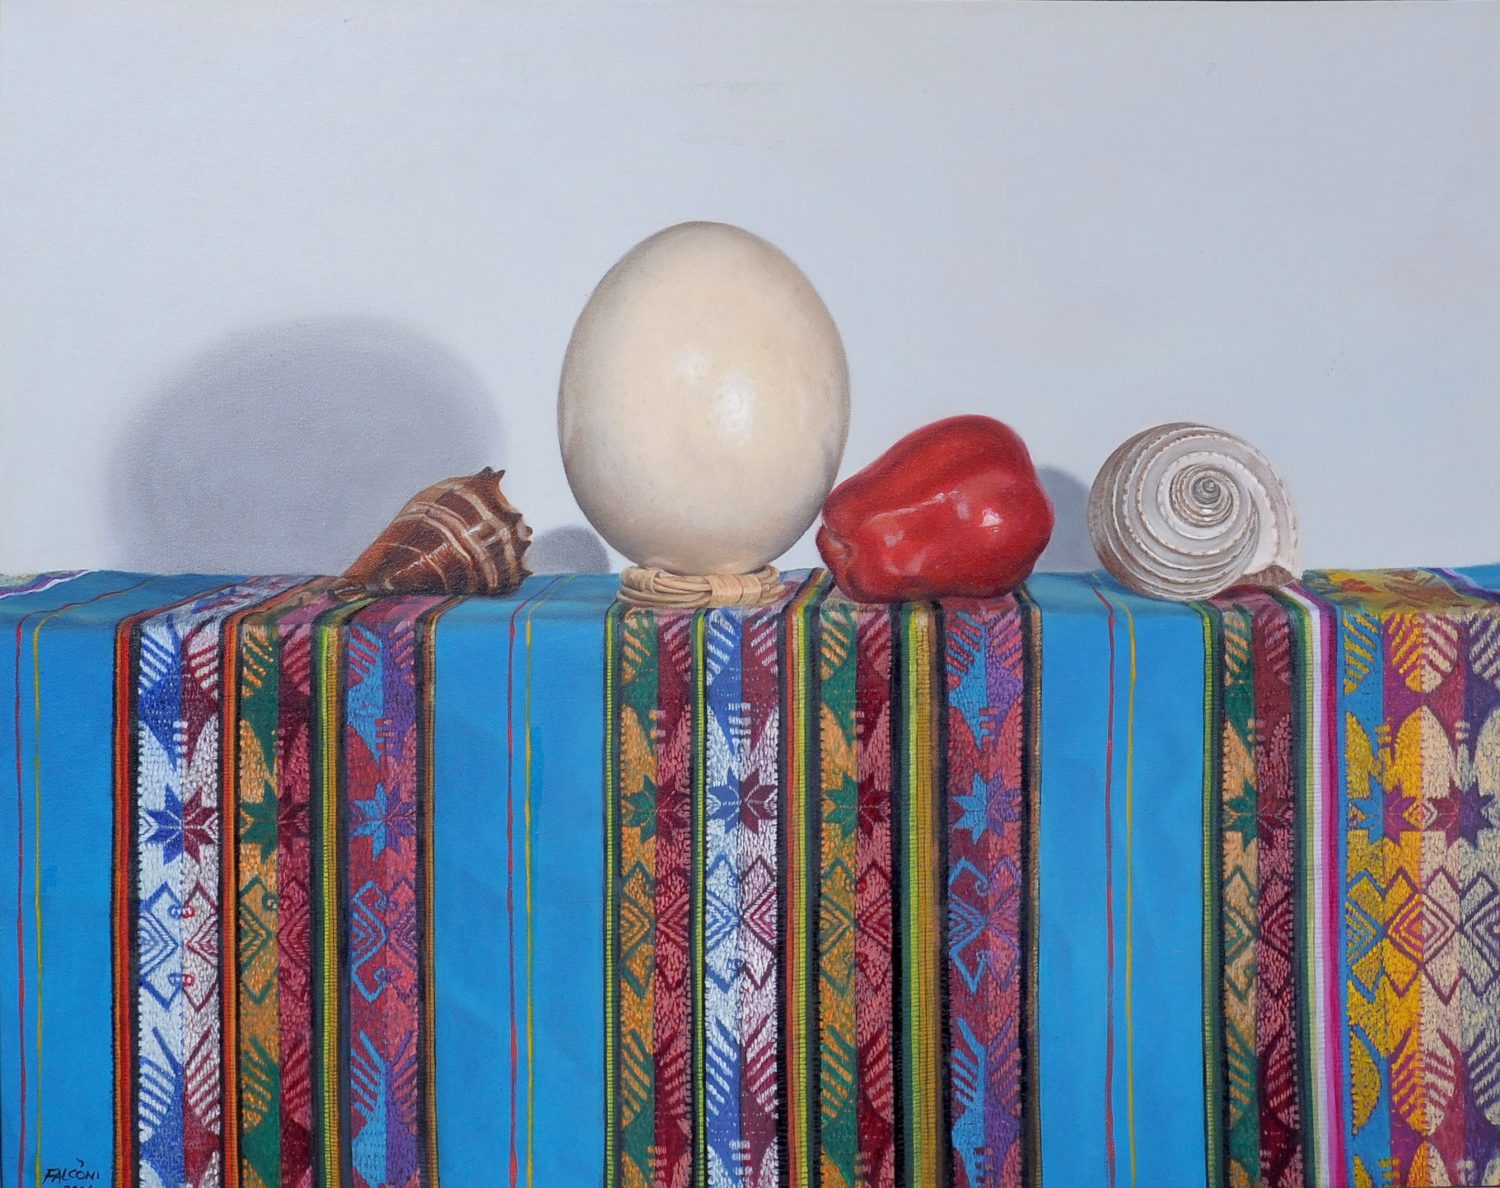 thumbnail of Untitled work by Ecuadorian artist Susana Falconi. medium: oil on canvas. Dimensions: 23 x 18 inches. date: 2006